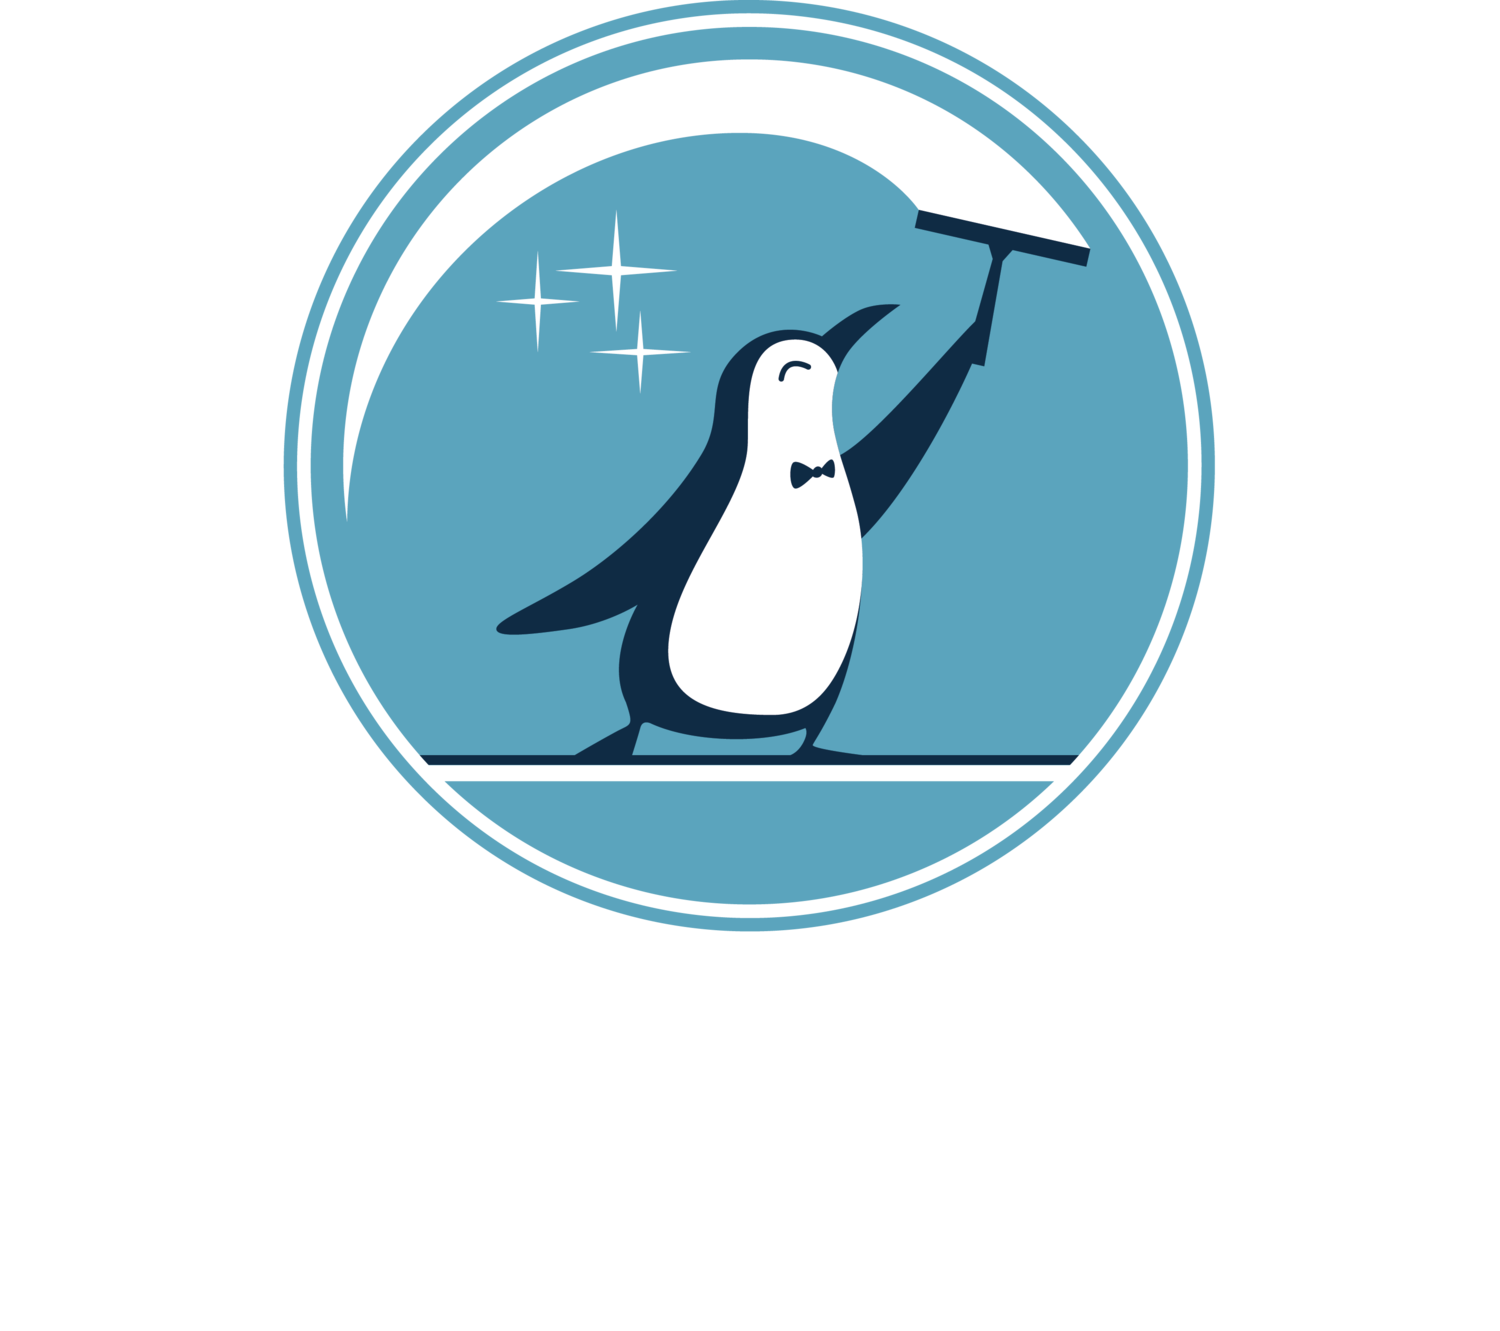 Clean clipart window washer. Sparkles glistens cleaning 